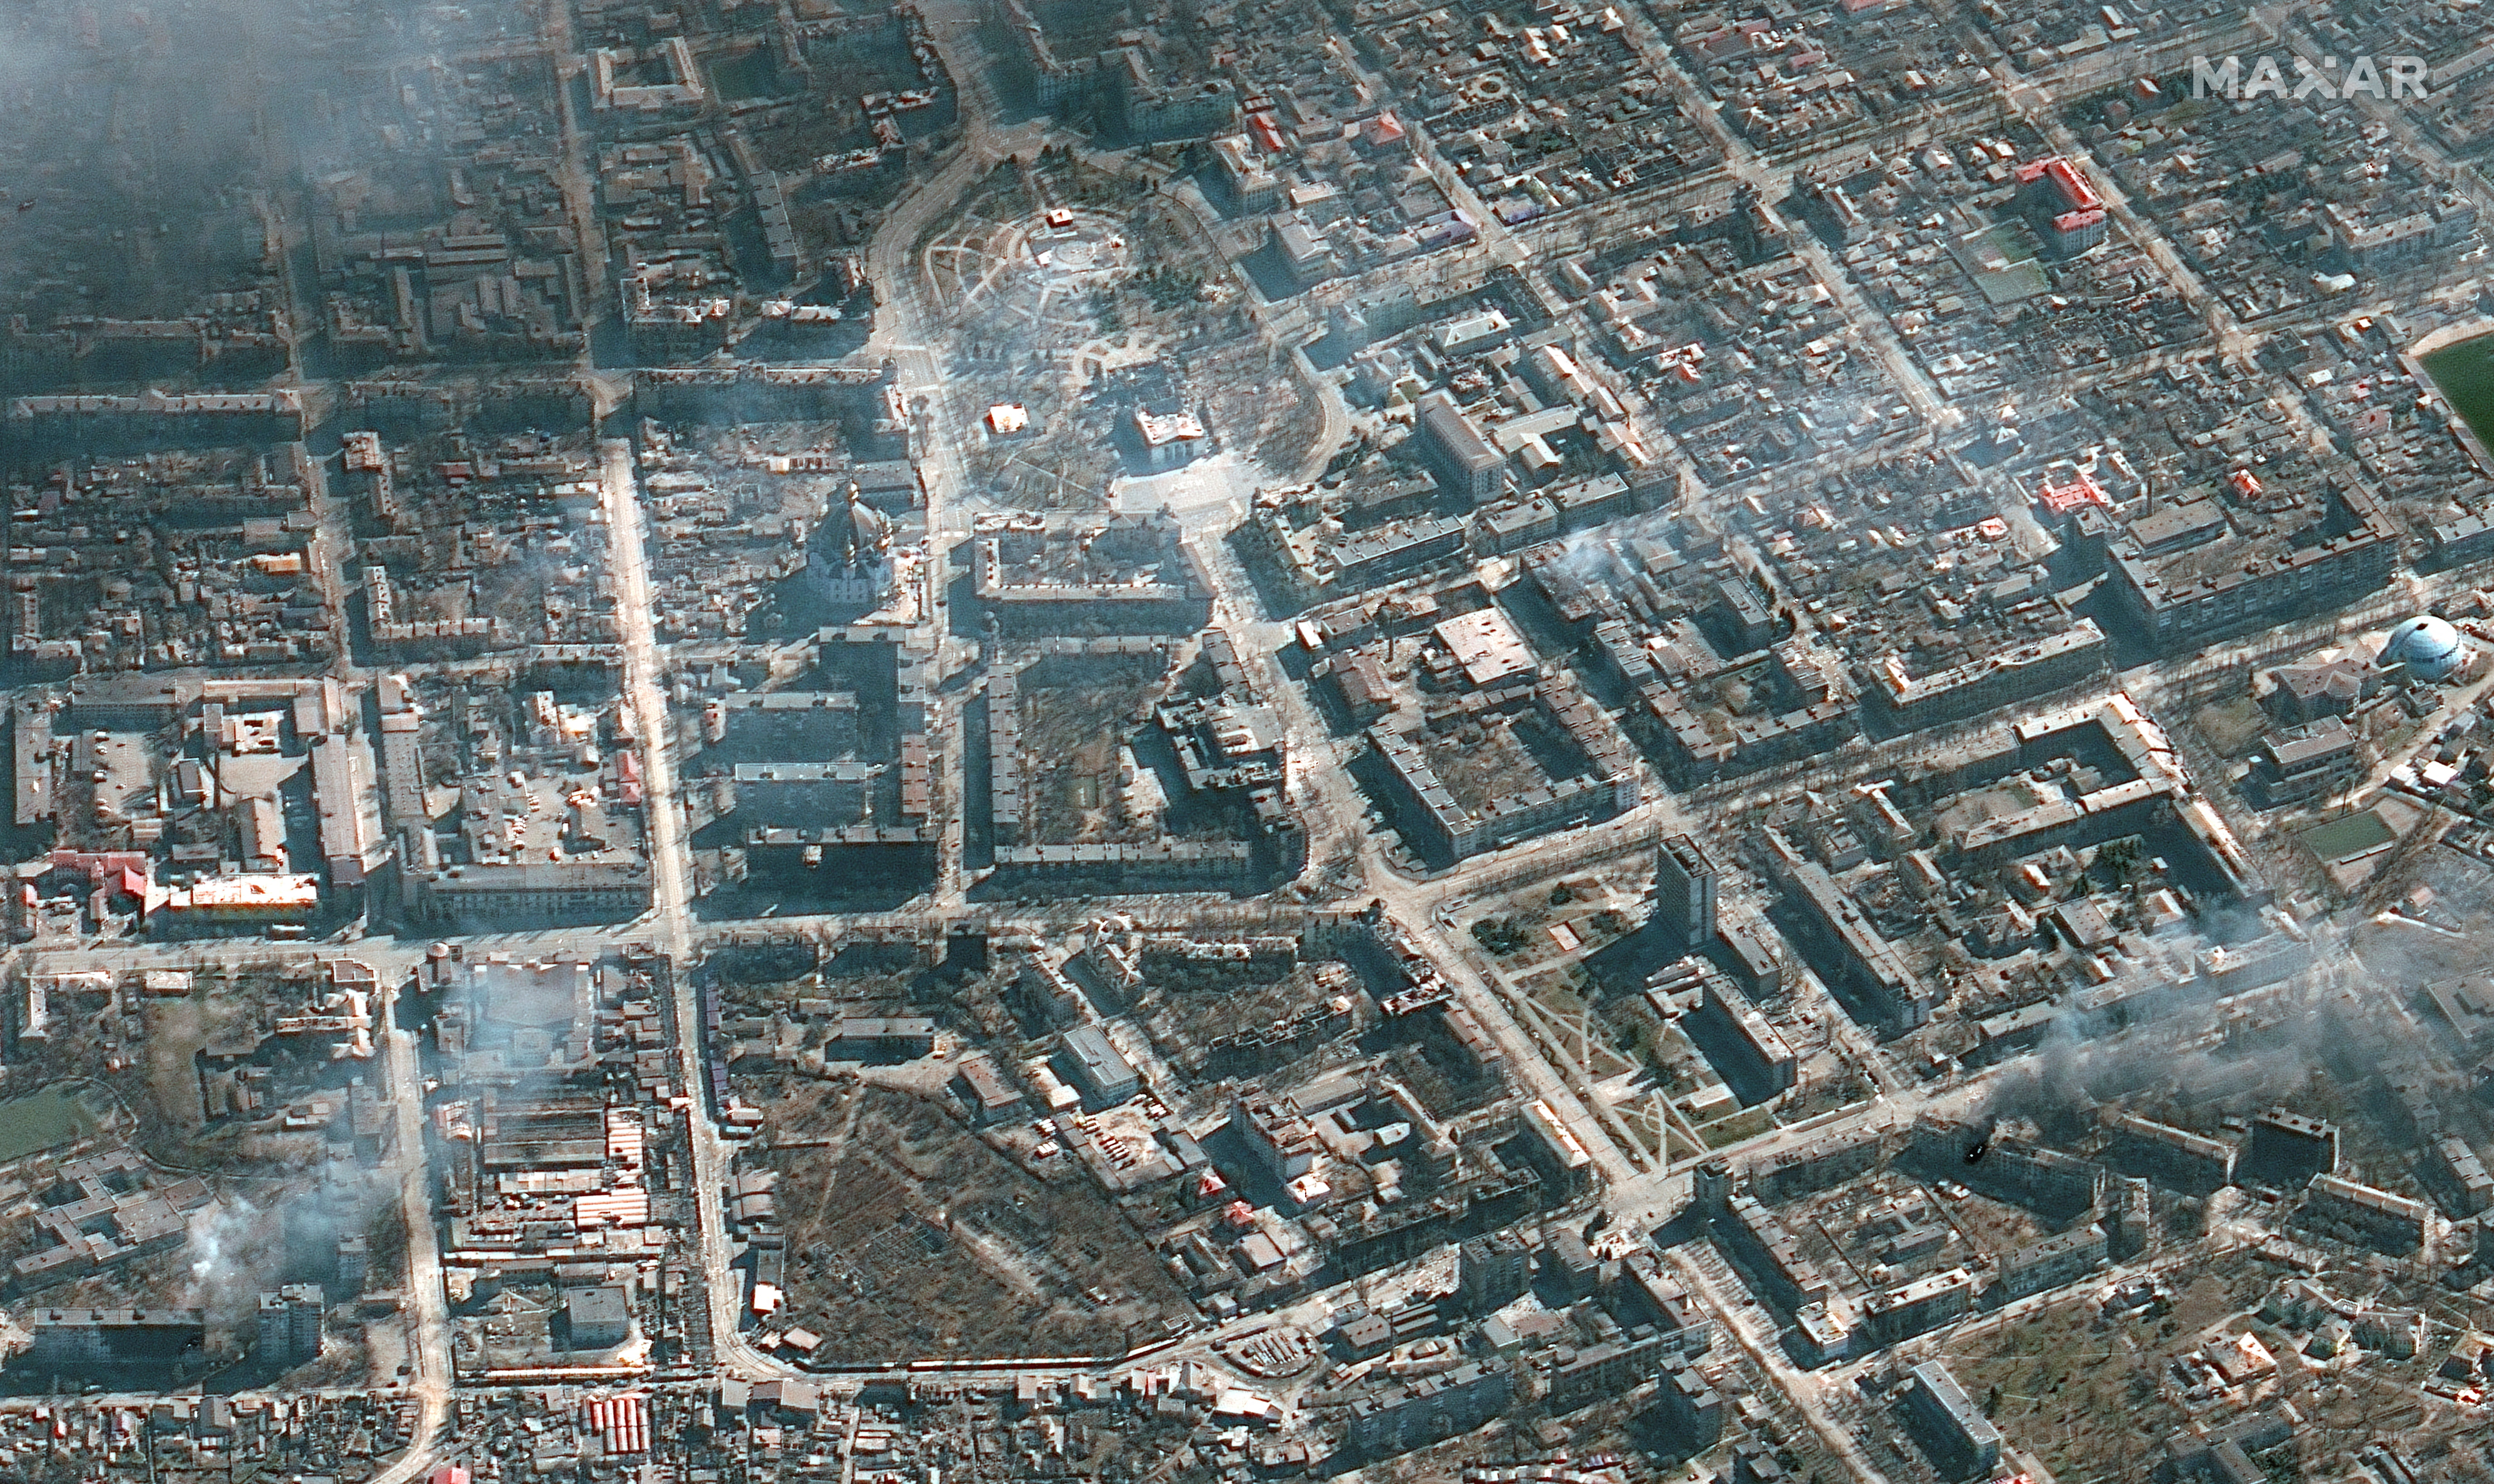 A satellite image shows an overview of Mariupol burning building and Mariupol Theater